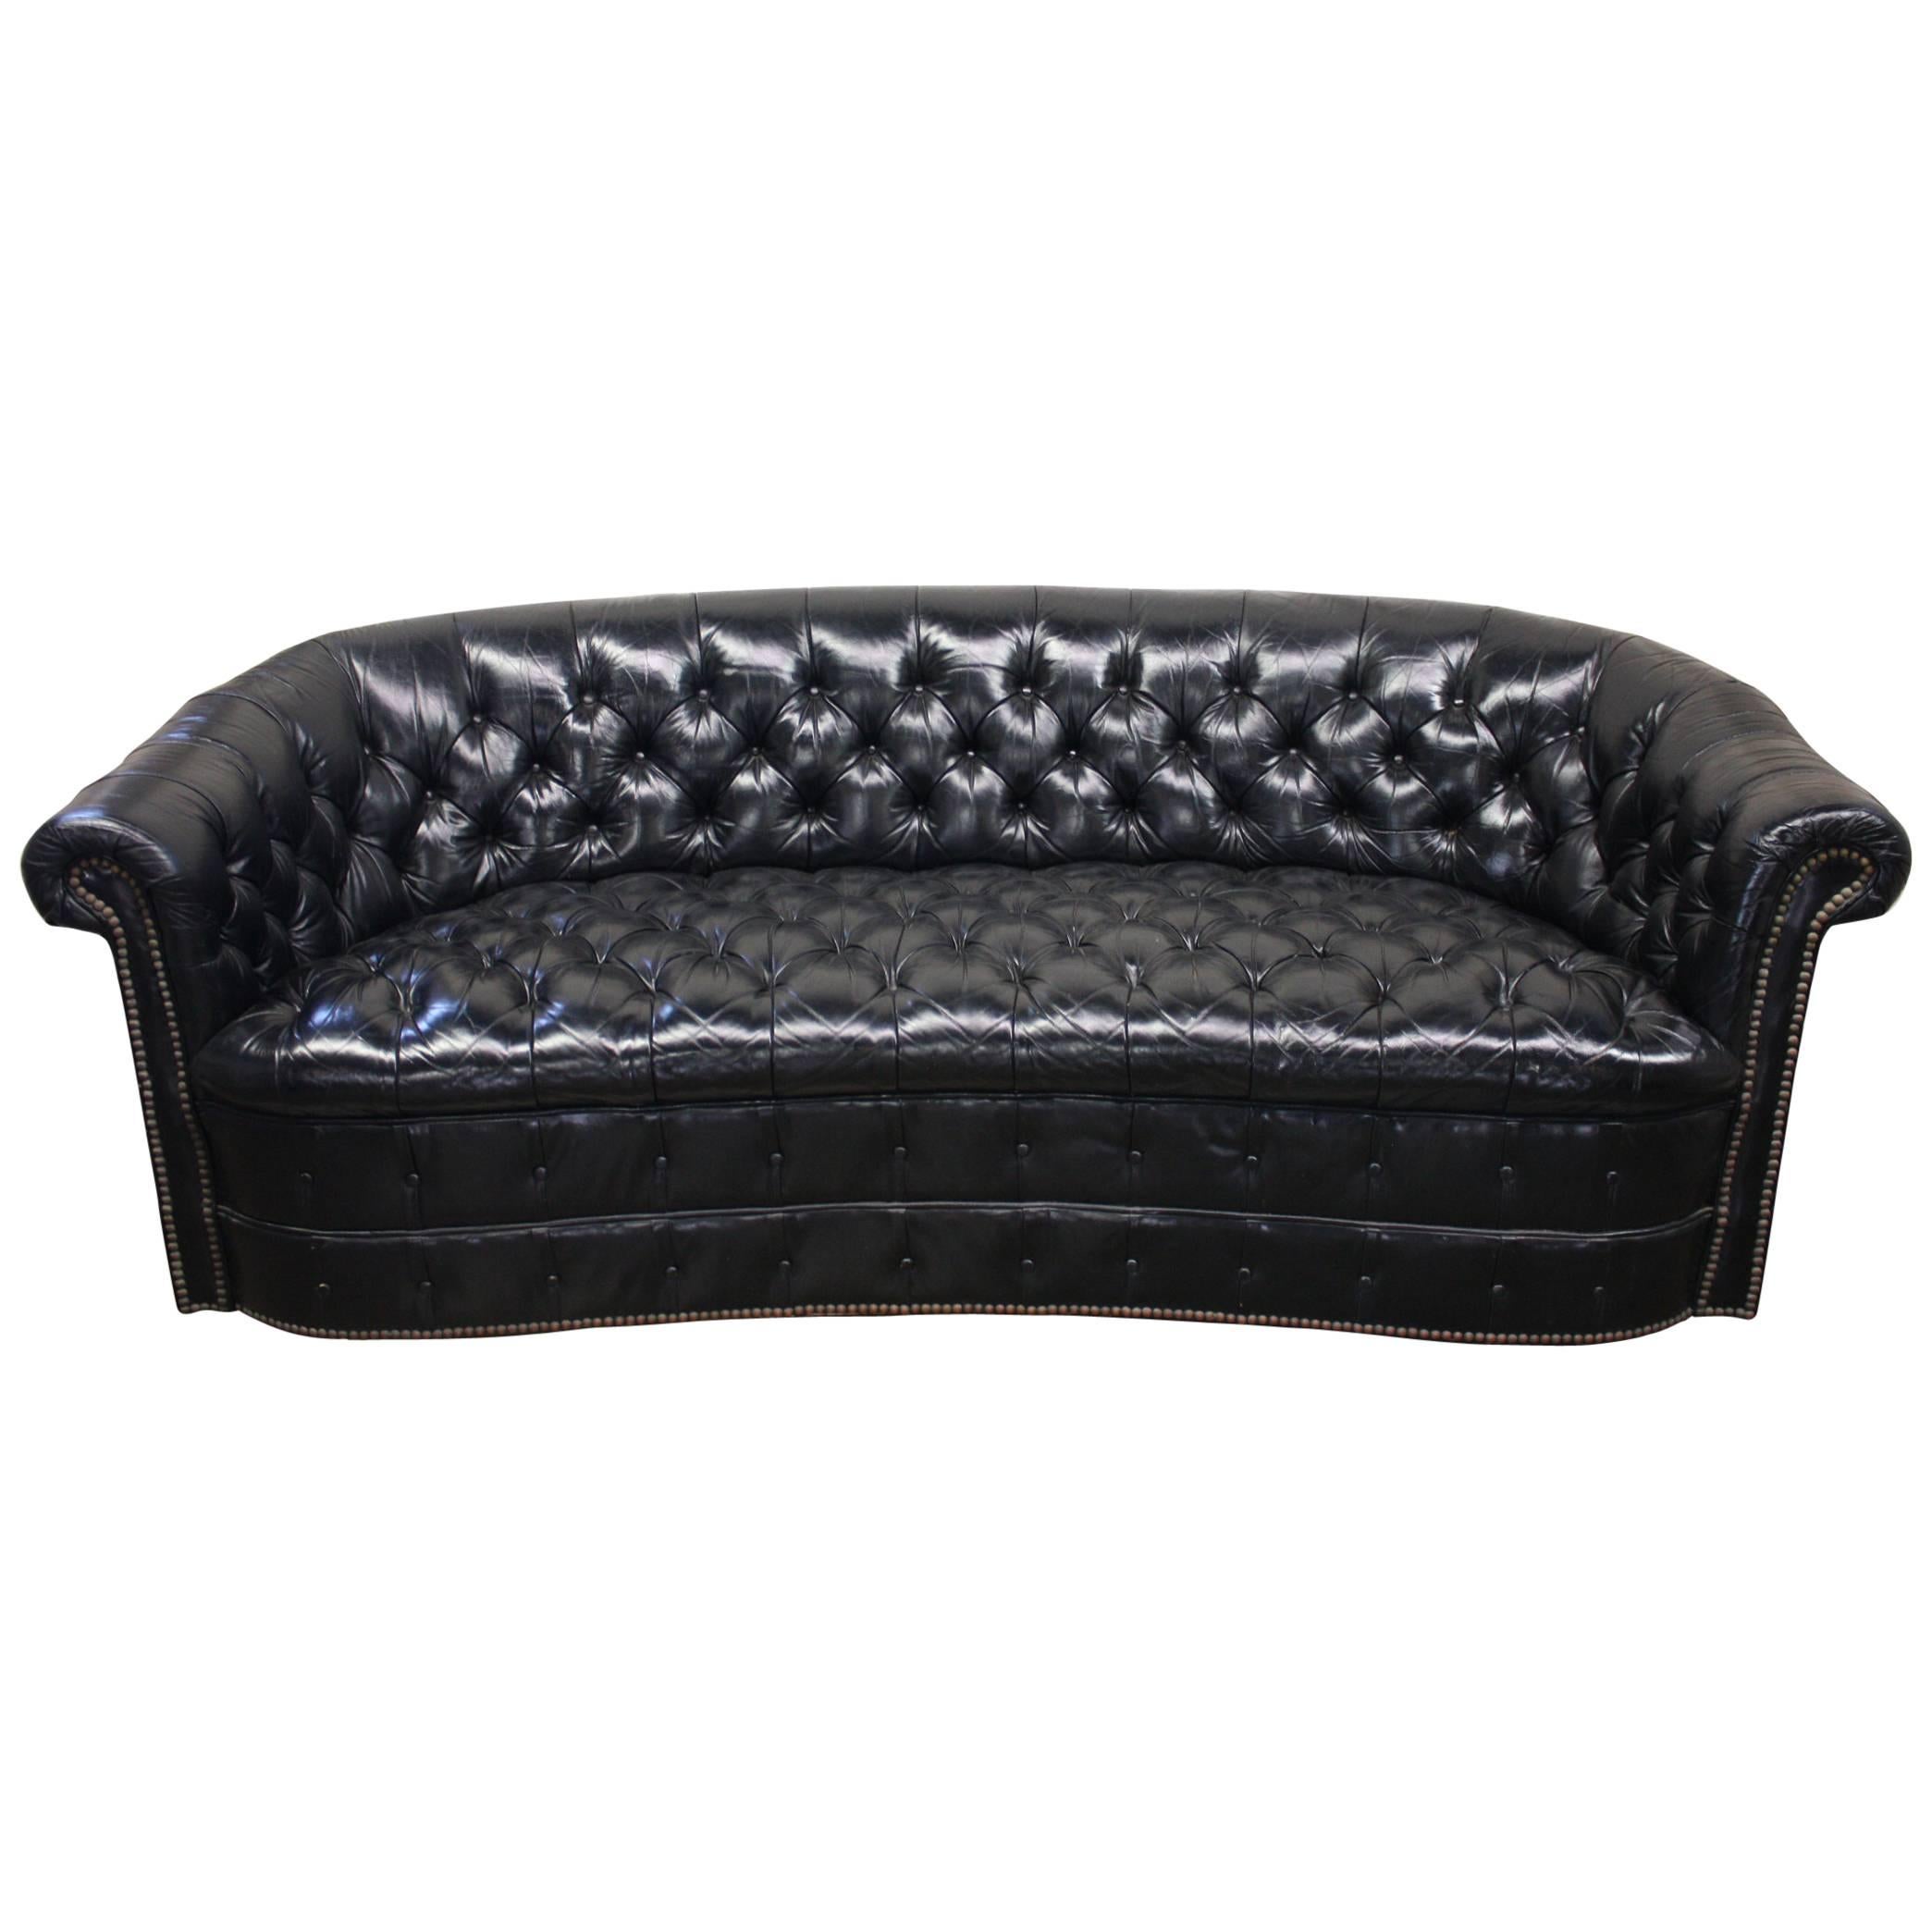 Gorgeous Black Leather Chesterfield